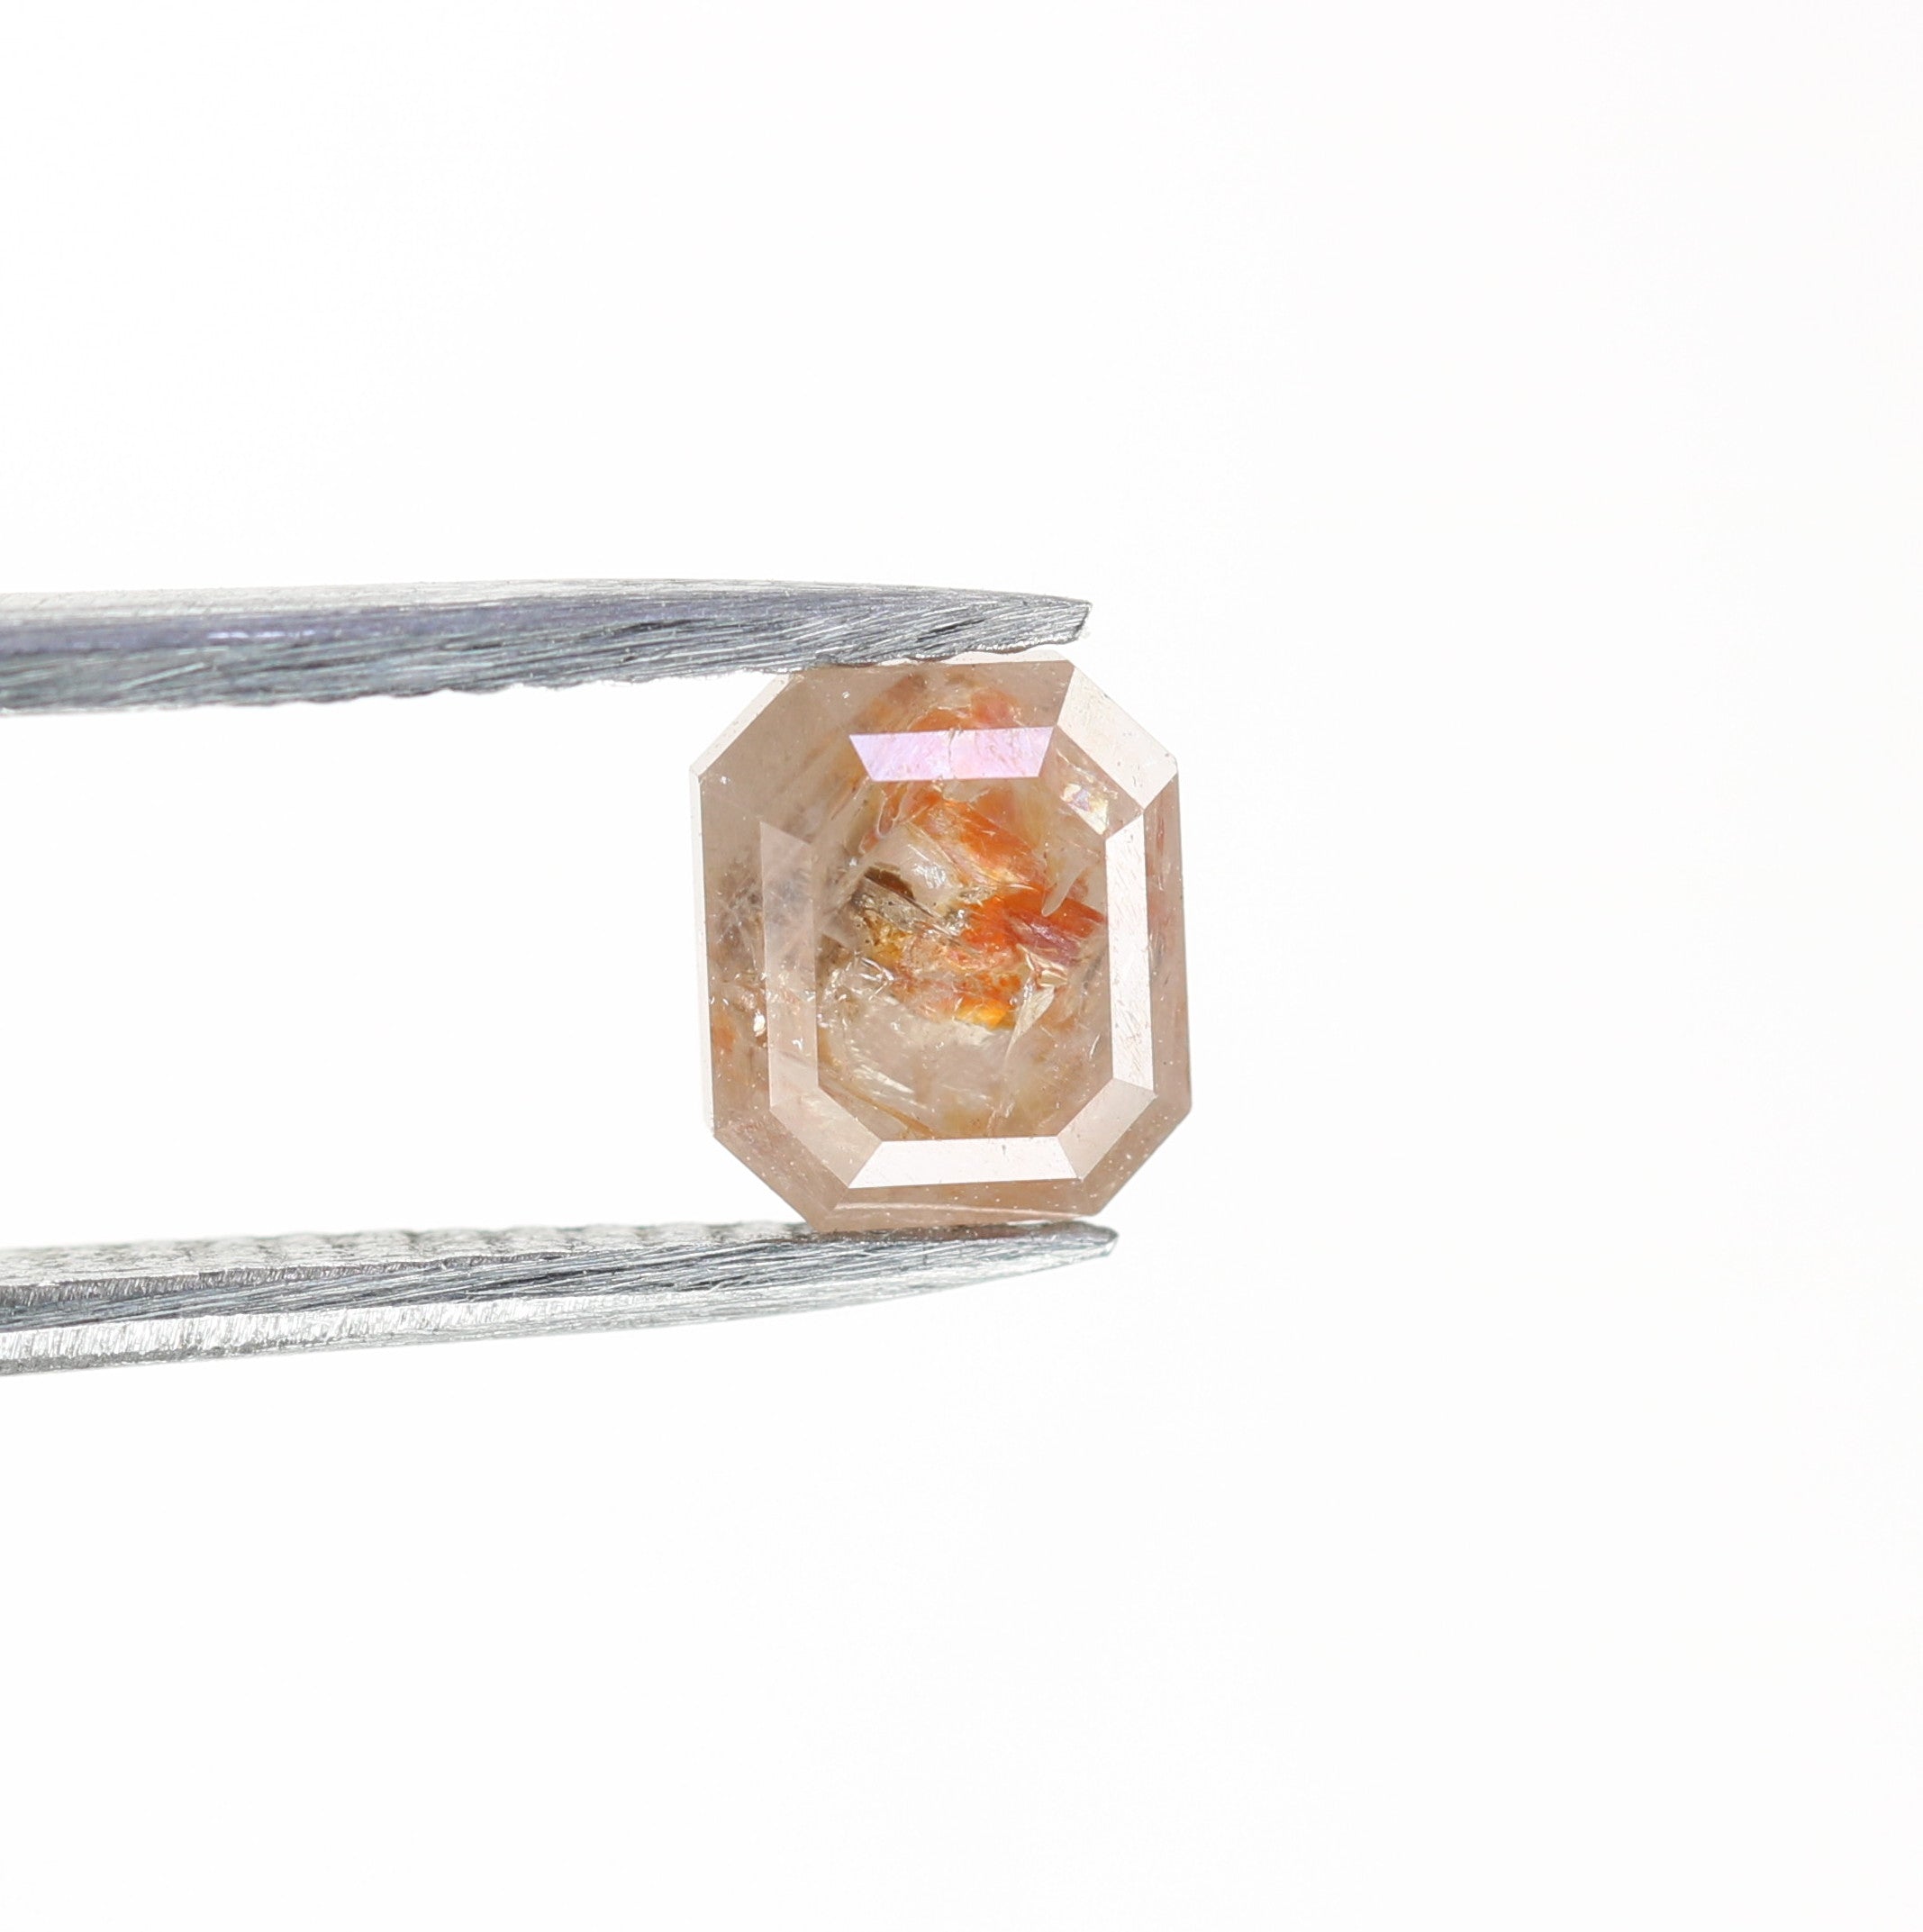 1.19 CT Natural Loose Peach Color Emerald Shape Diamond for Engagement Ring